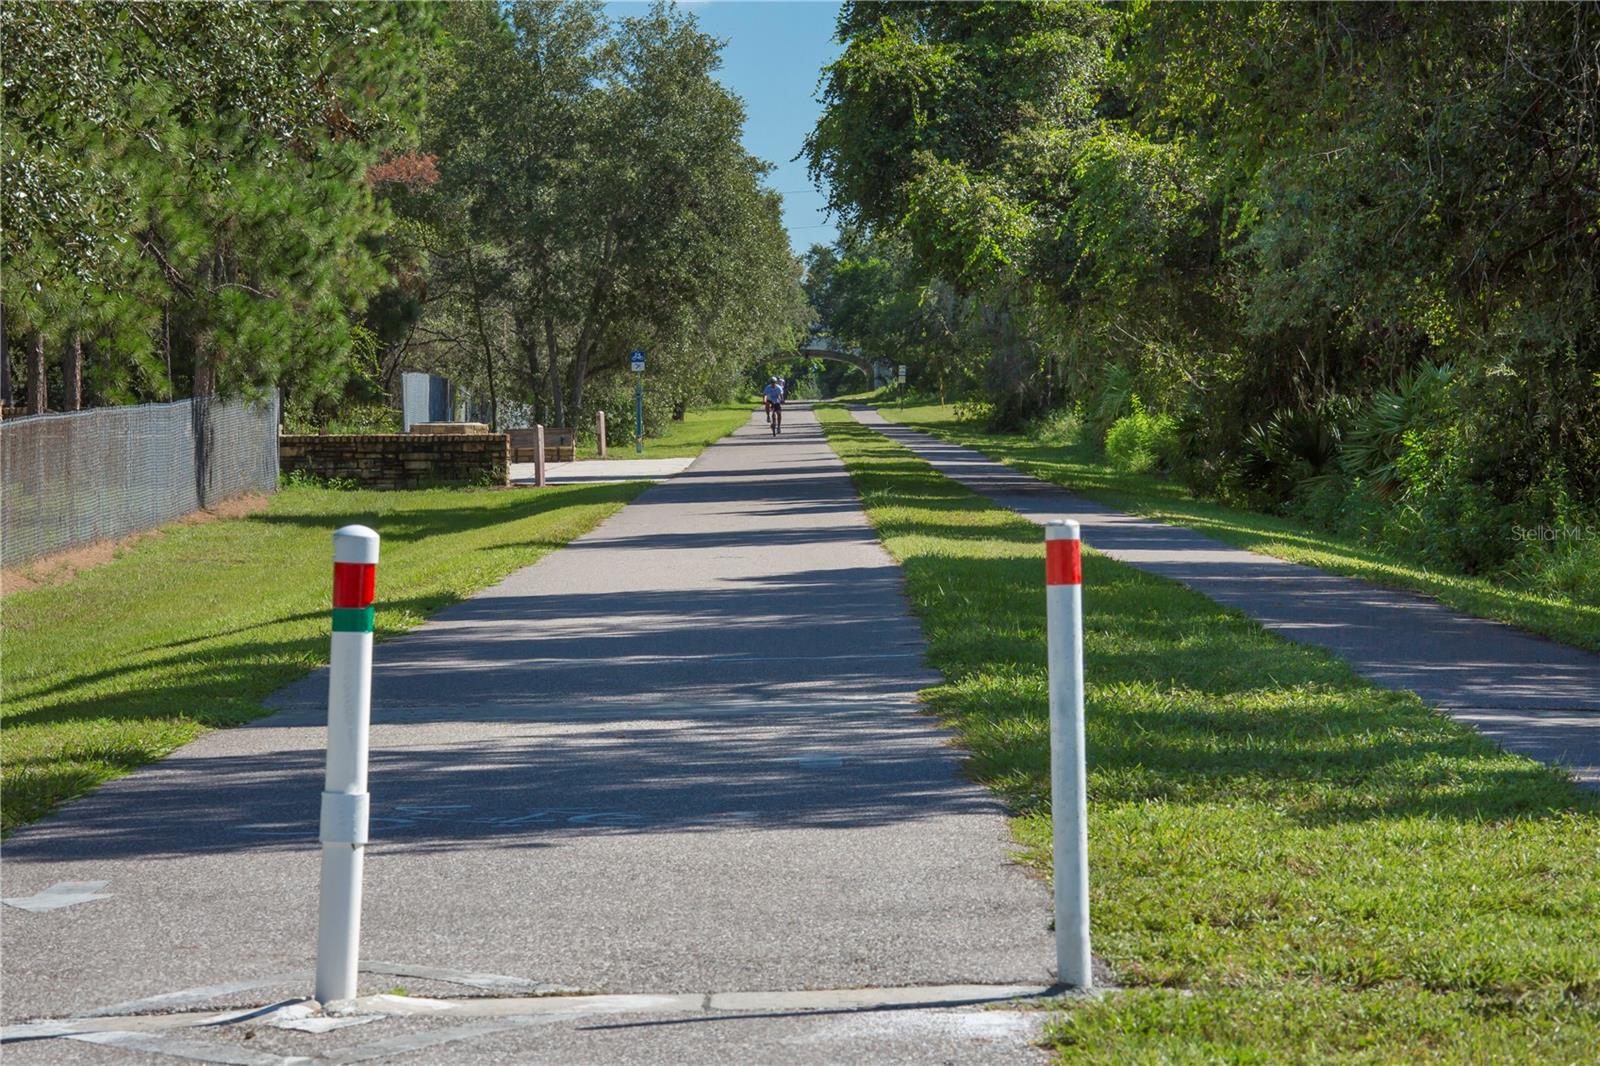 Enjoy walking and biking on the Pinellas Trail which spans the county with over 45 miles of trail.